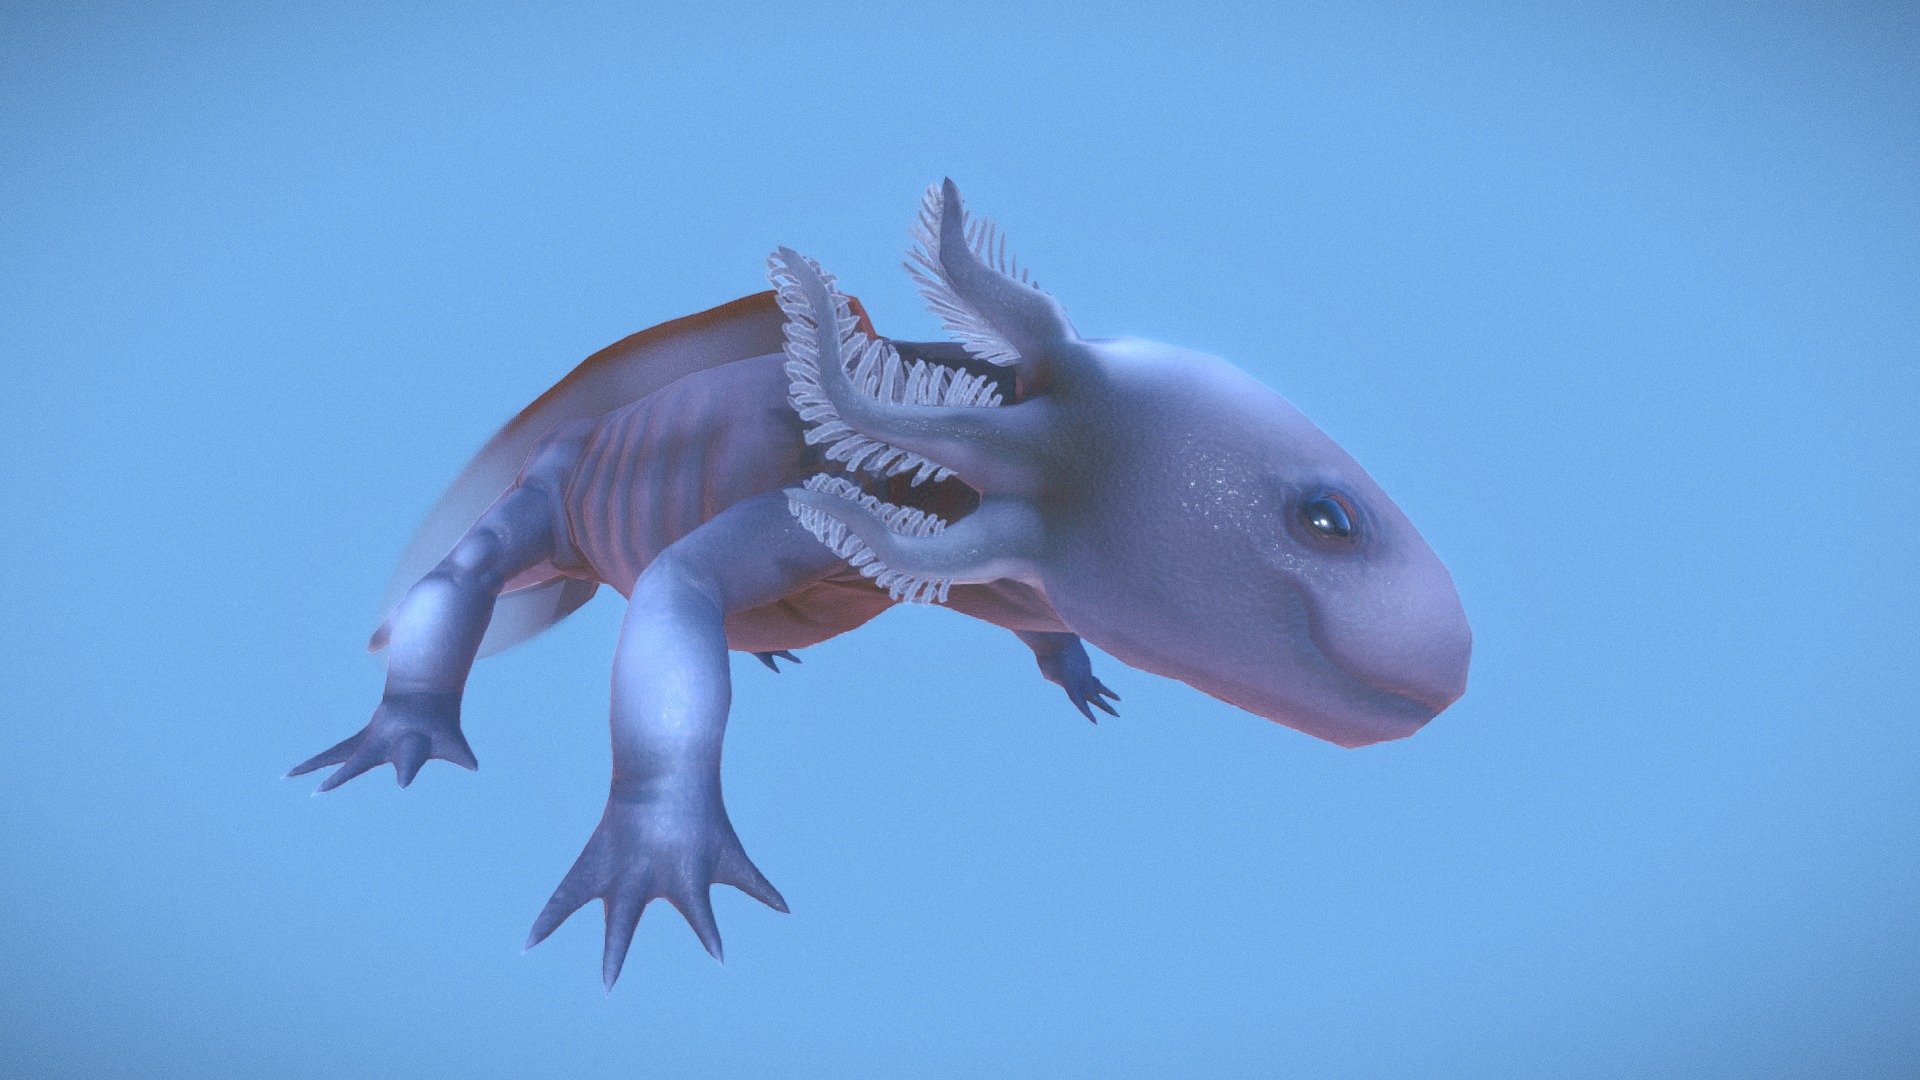 i love axolotls they are such odd creatures and i really was inspired to create one myself since i cant own a real one yet.
Meet Axle - Axle the Axolotl - 3D model by Georgia.Perry 3d model